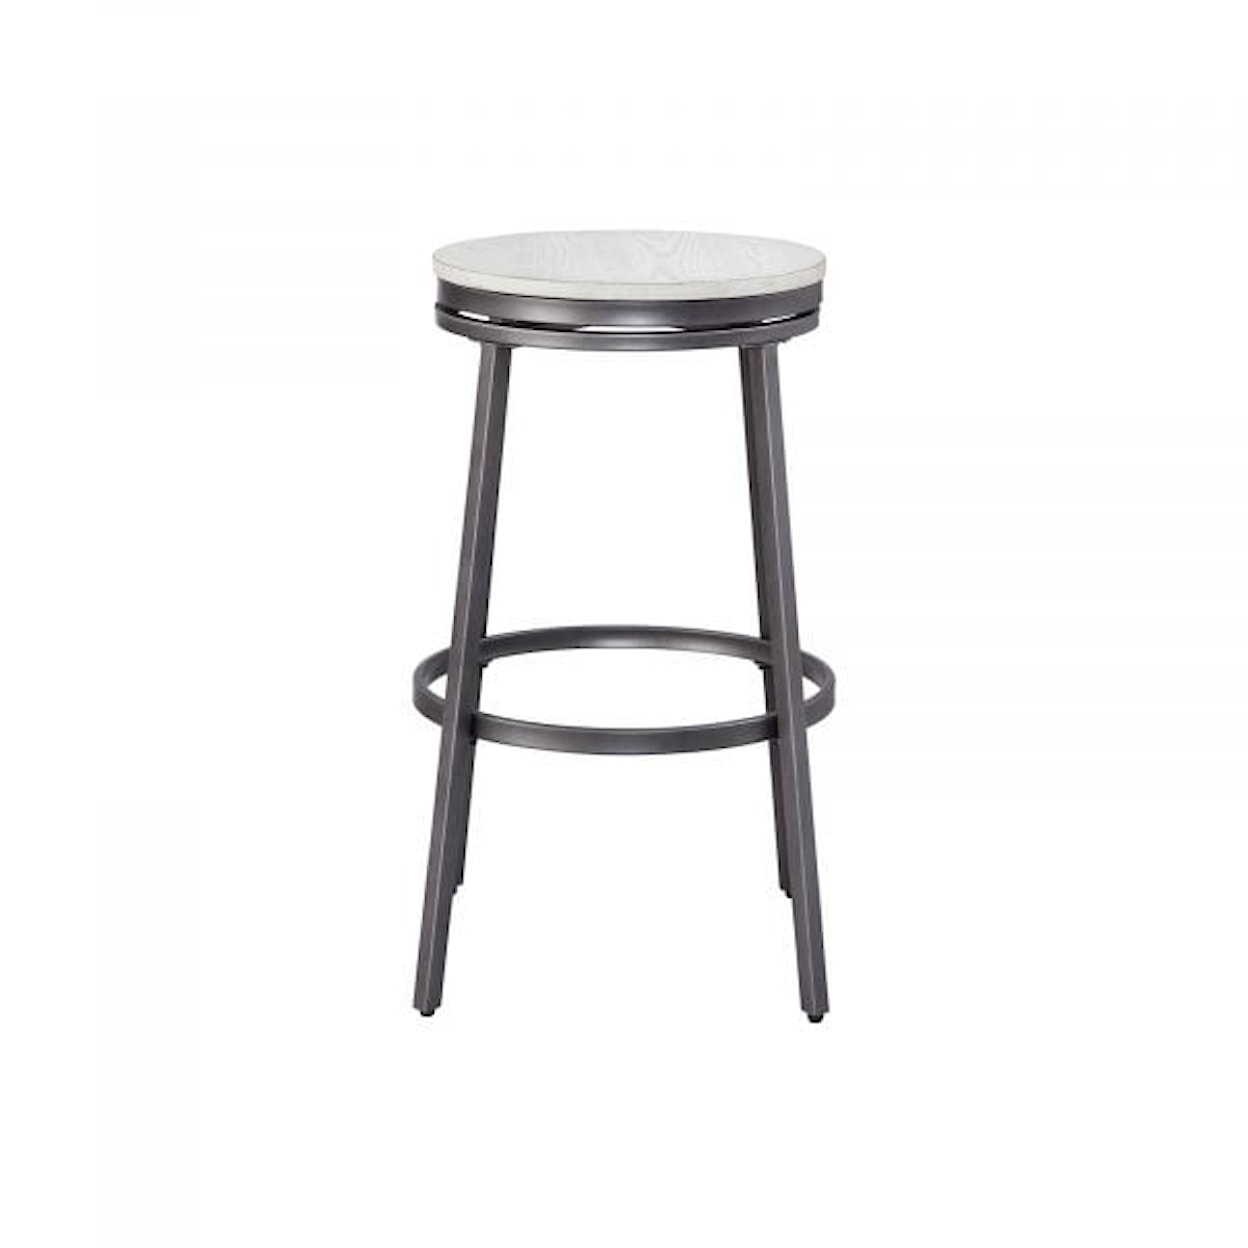 American Woodcrafters Metal Barstools Backless Barstool